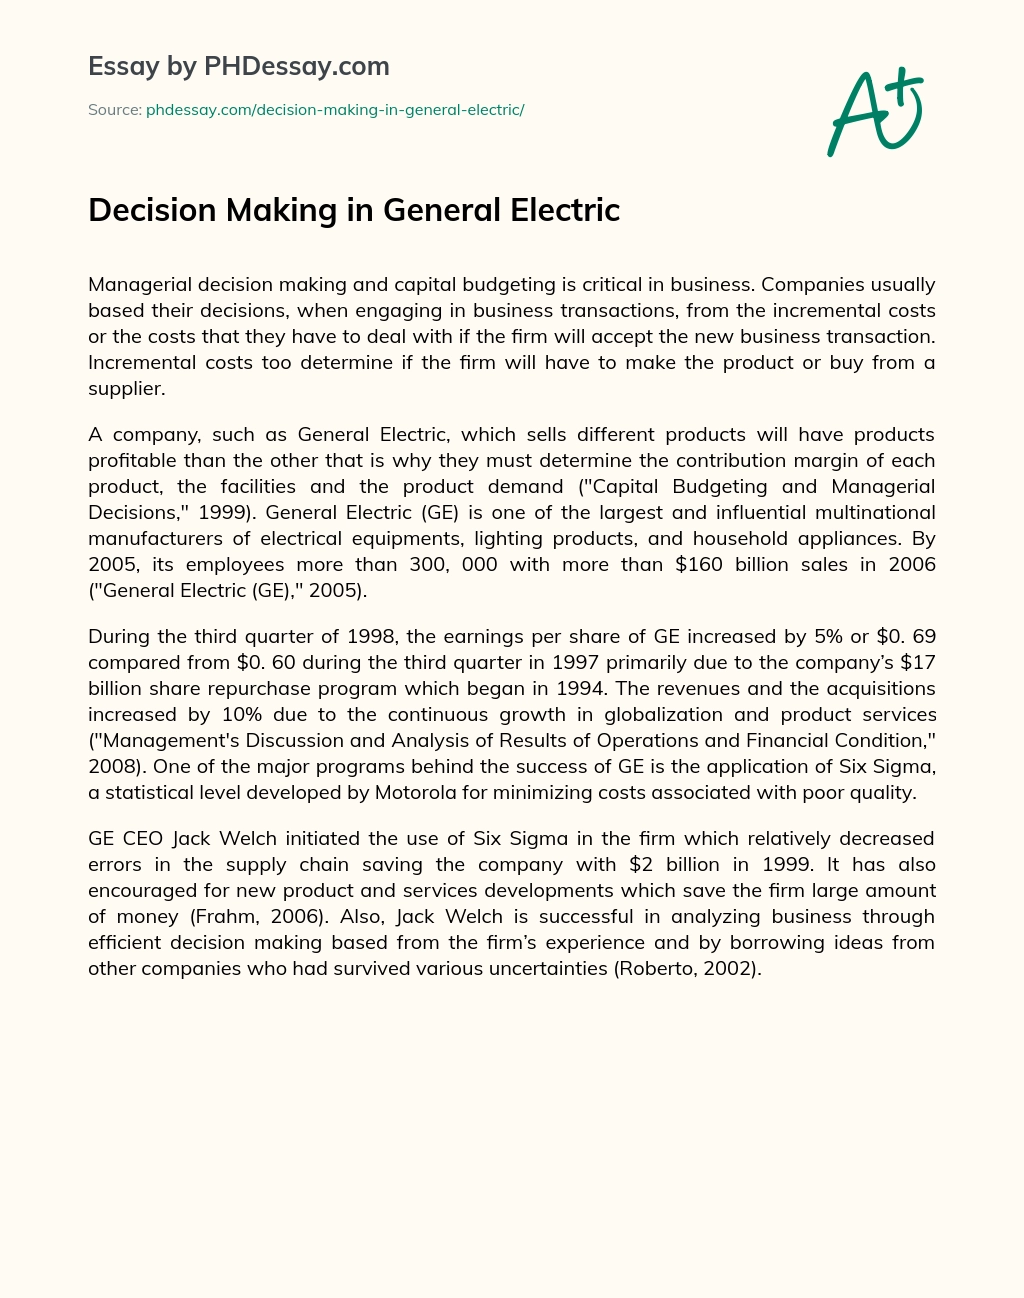 Decision Making in General Electric essay